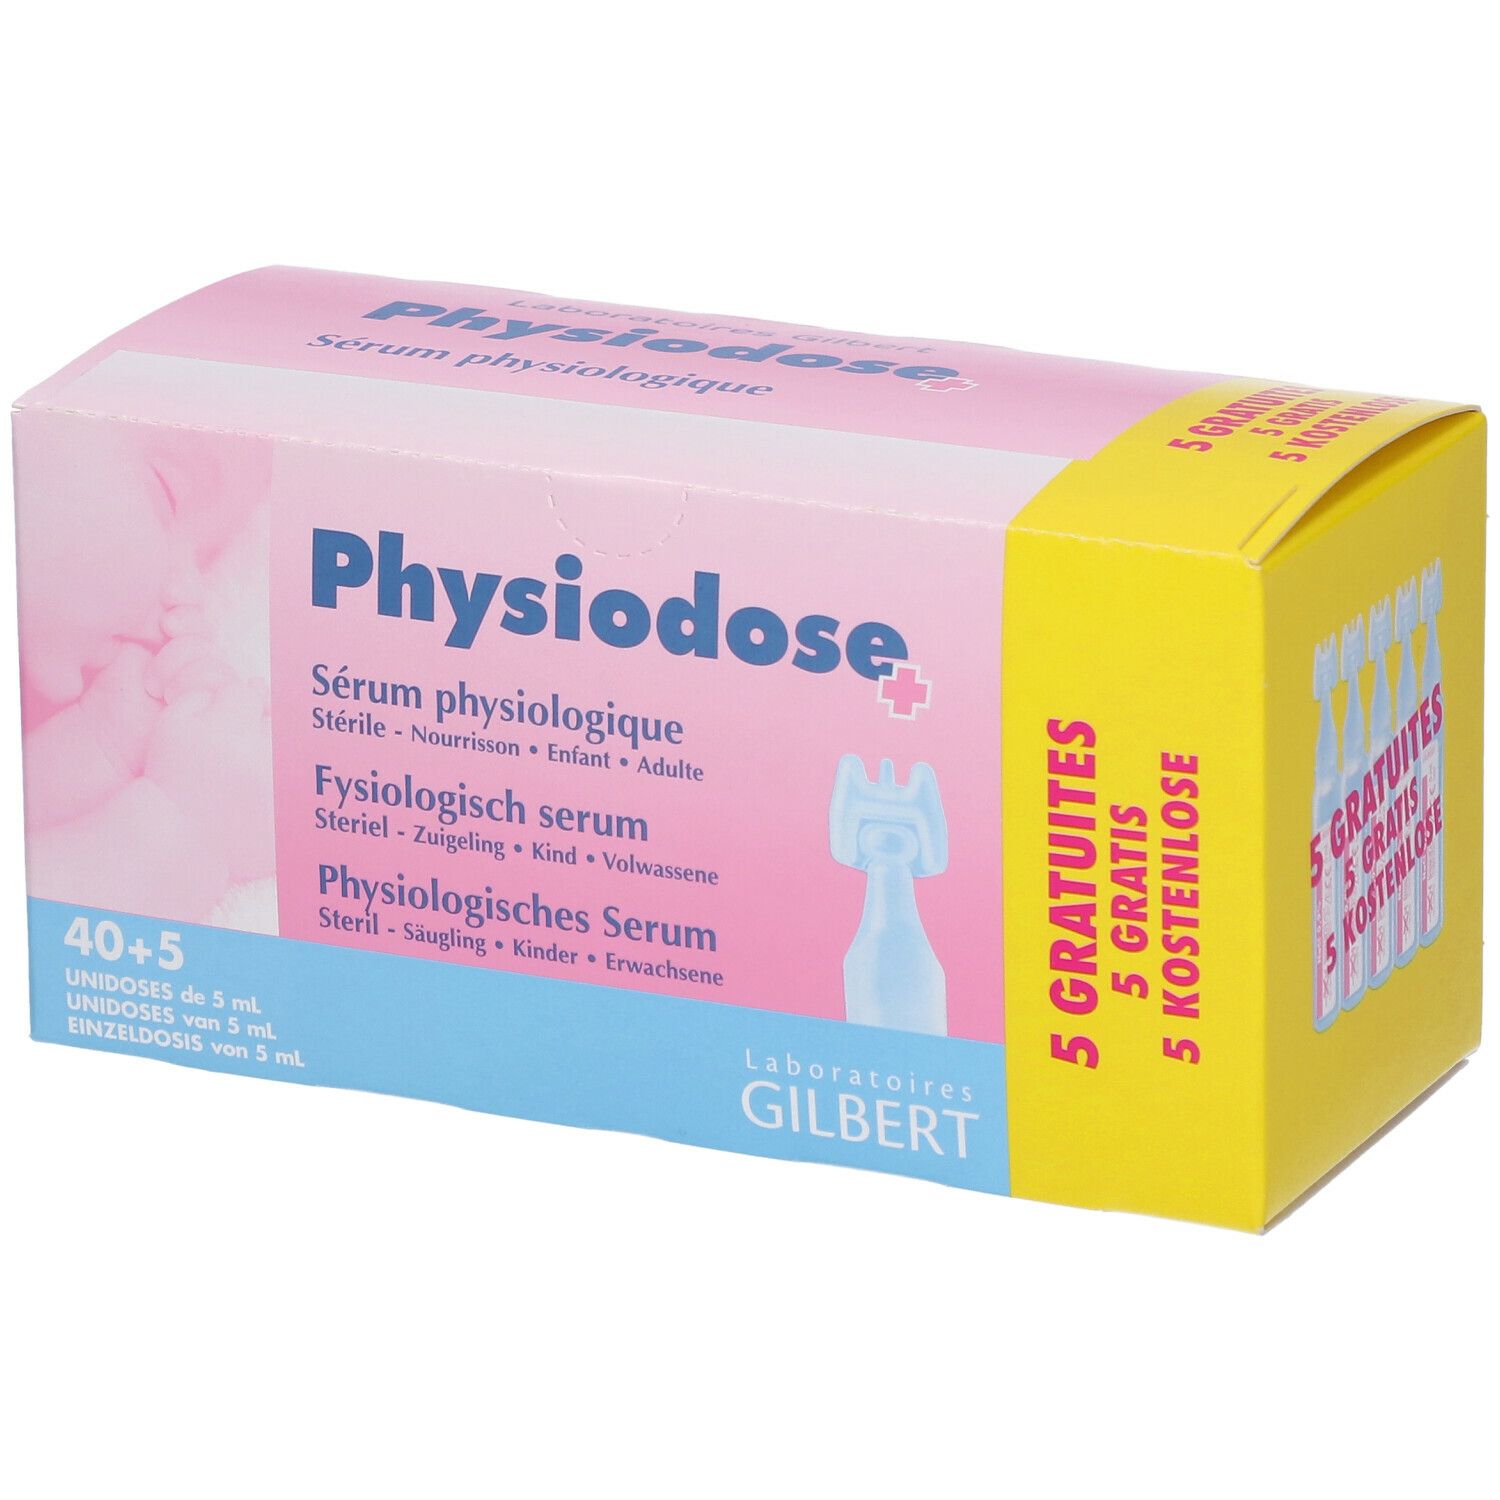 Gratuites Physiodose Serum Physiologique Sterile 40 x 5ml New in box